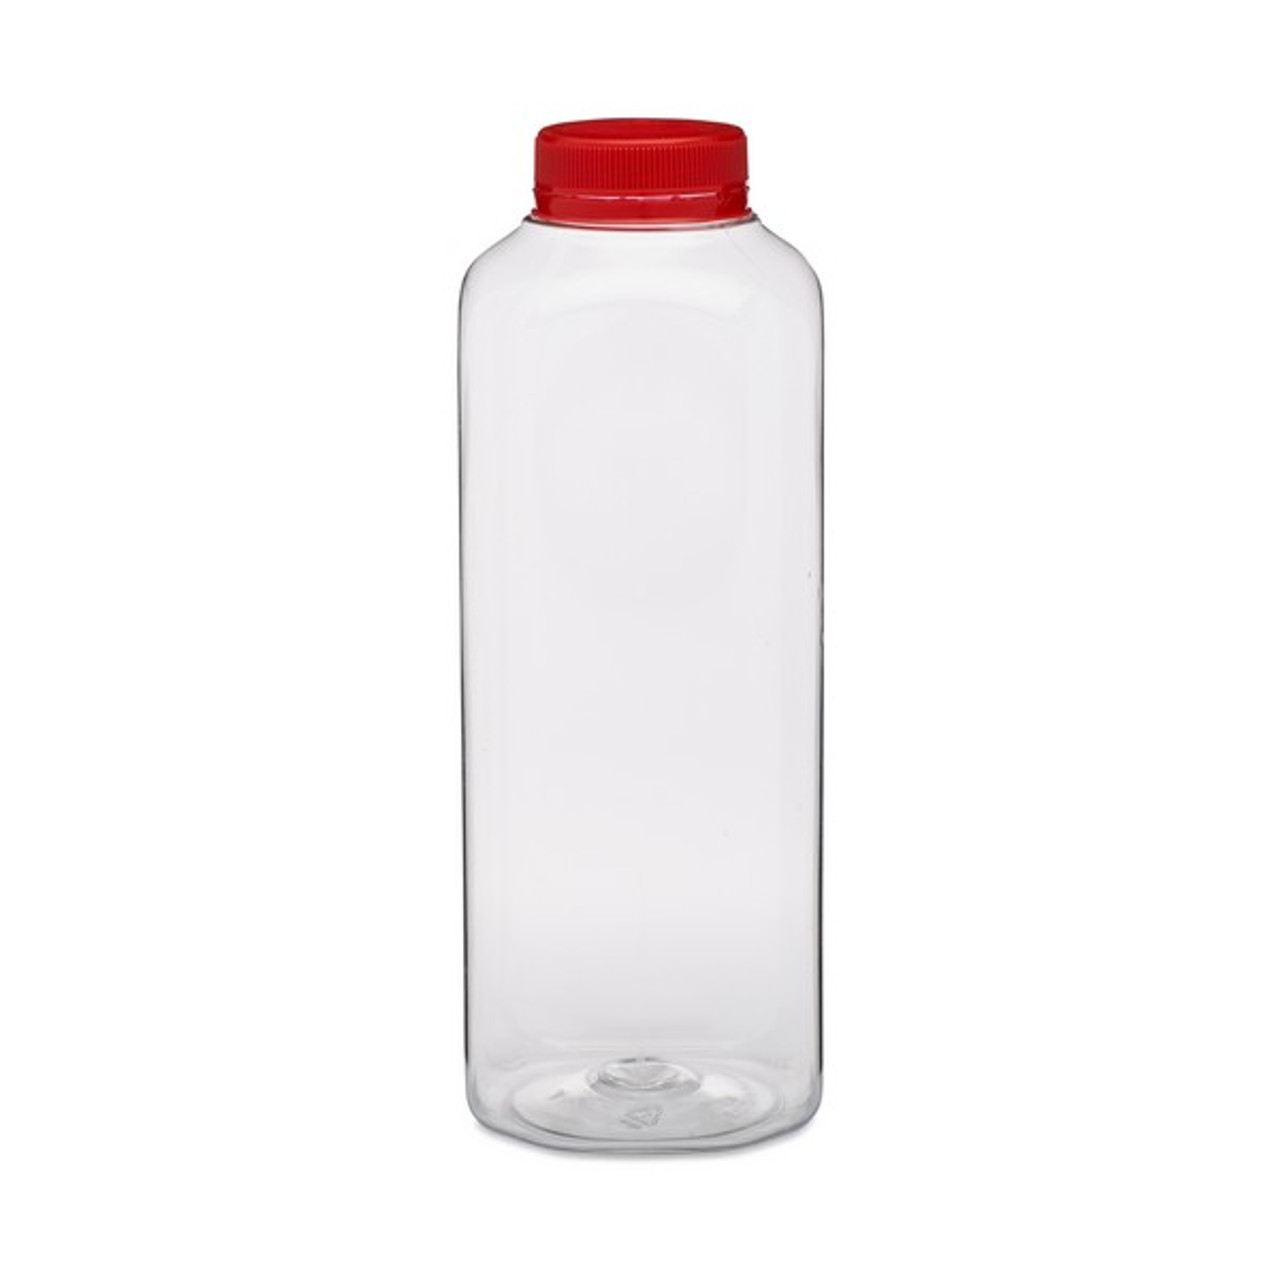 Plastic Disposable Juice Glass, Packaging Type: Packet